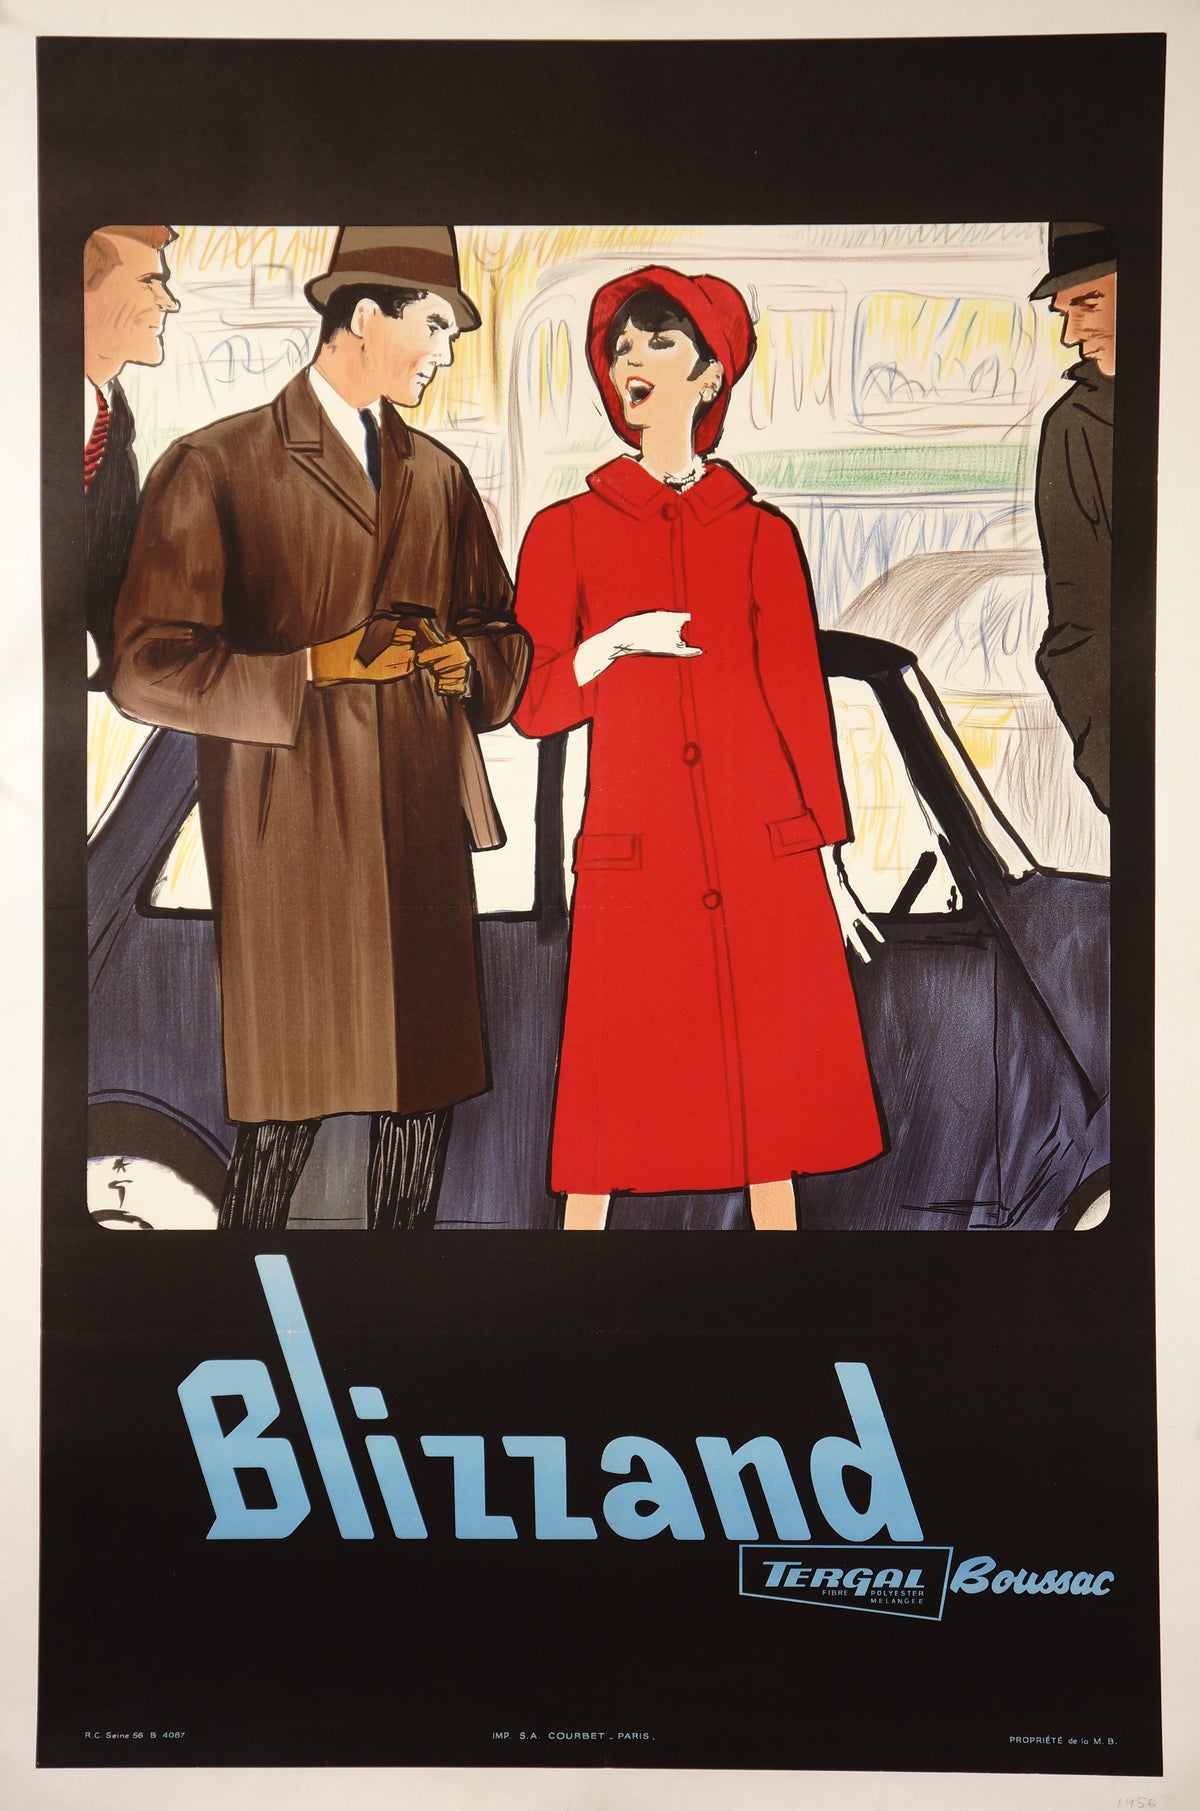 Blizzand by Rene Gruau - Authentic Vintage Poster